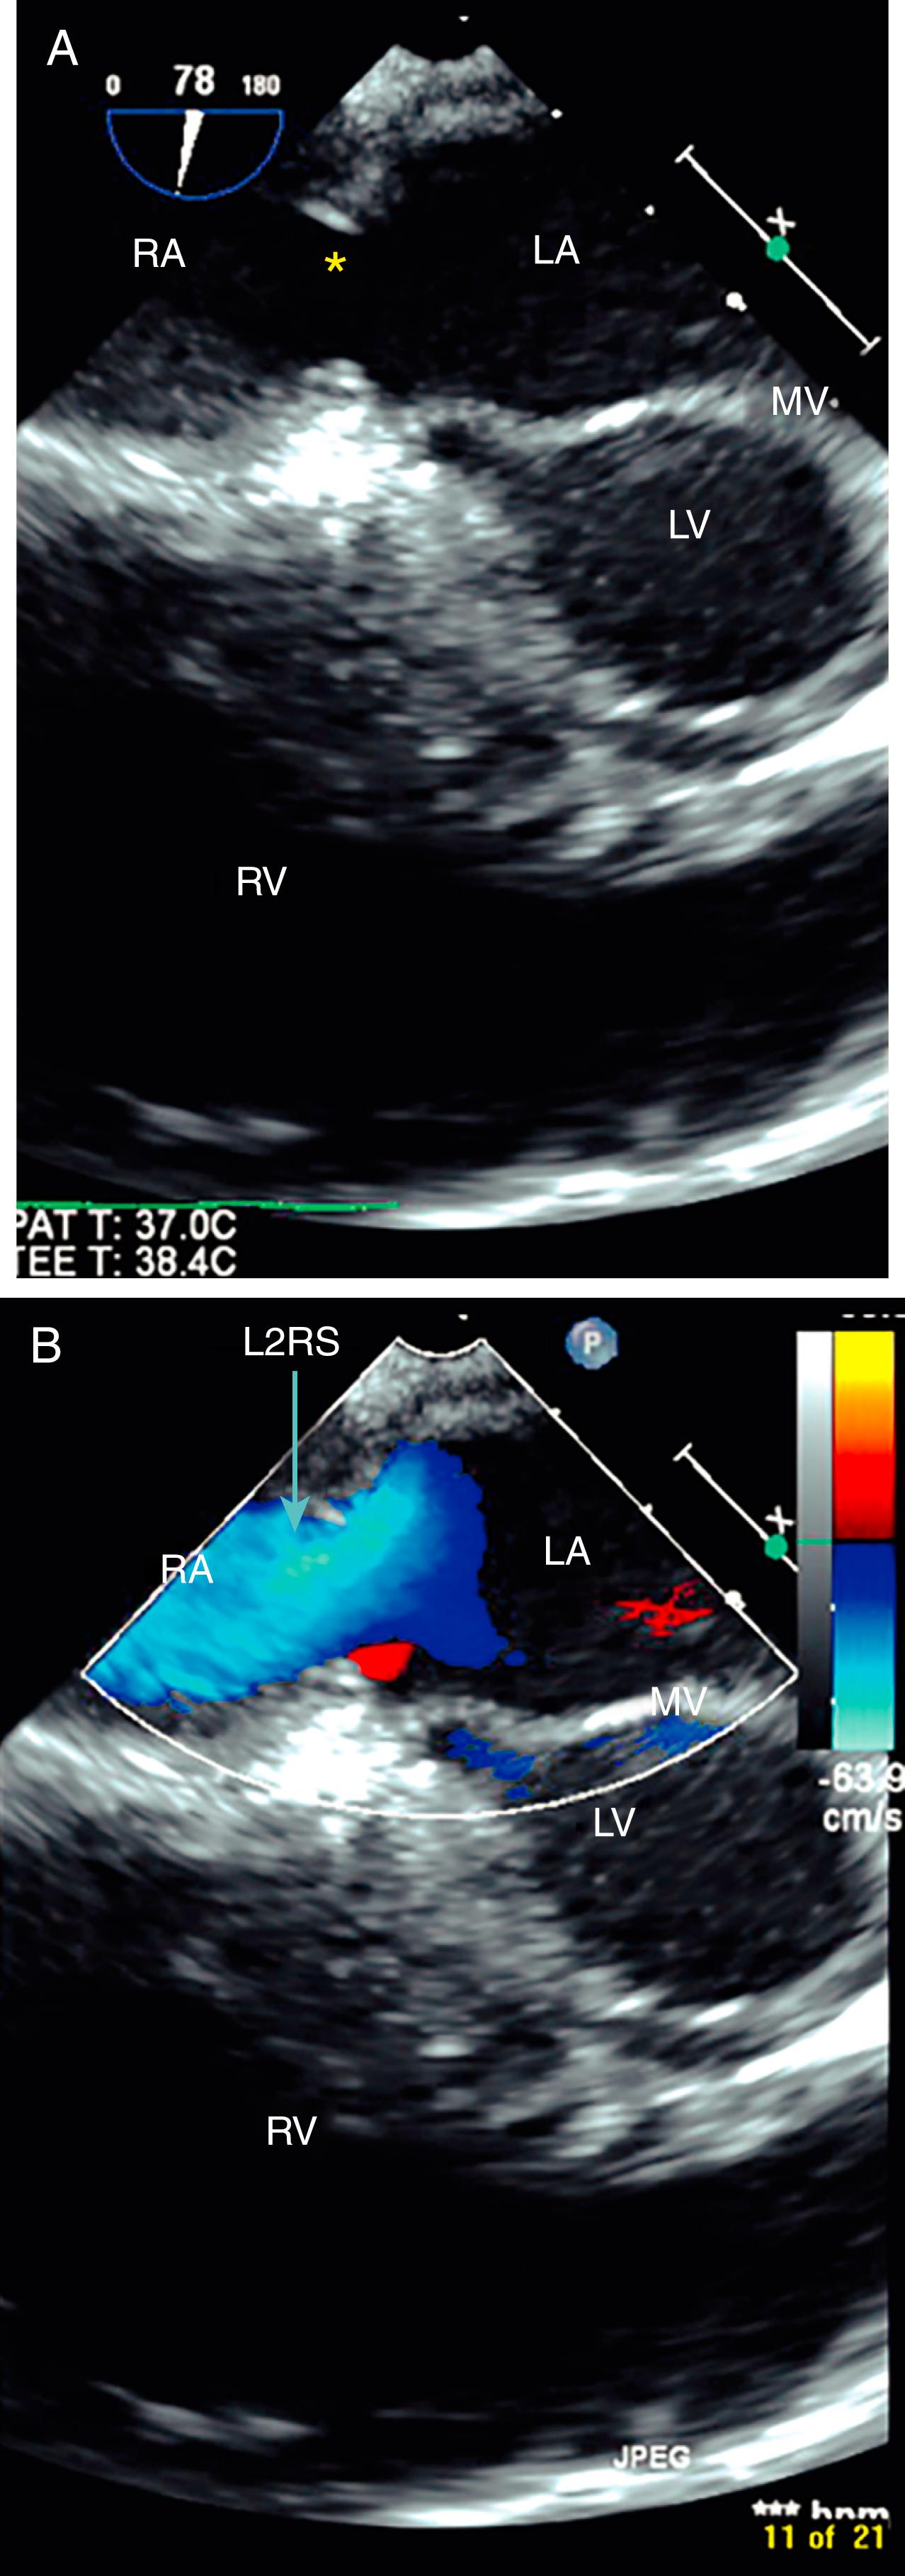 Figure 141.4, A, Coronary sinus atrial septal defect (asterisk) visualized by transesophageal echocardiography. B, Color Doppler imaging shows the left-to-right shunt (L2RS). LA, Left atrium; LV, left ventricle; MV, mitral valve; RA, right atrium; RV, right ventricle. (See accompanying Video 141.4 )